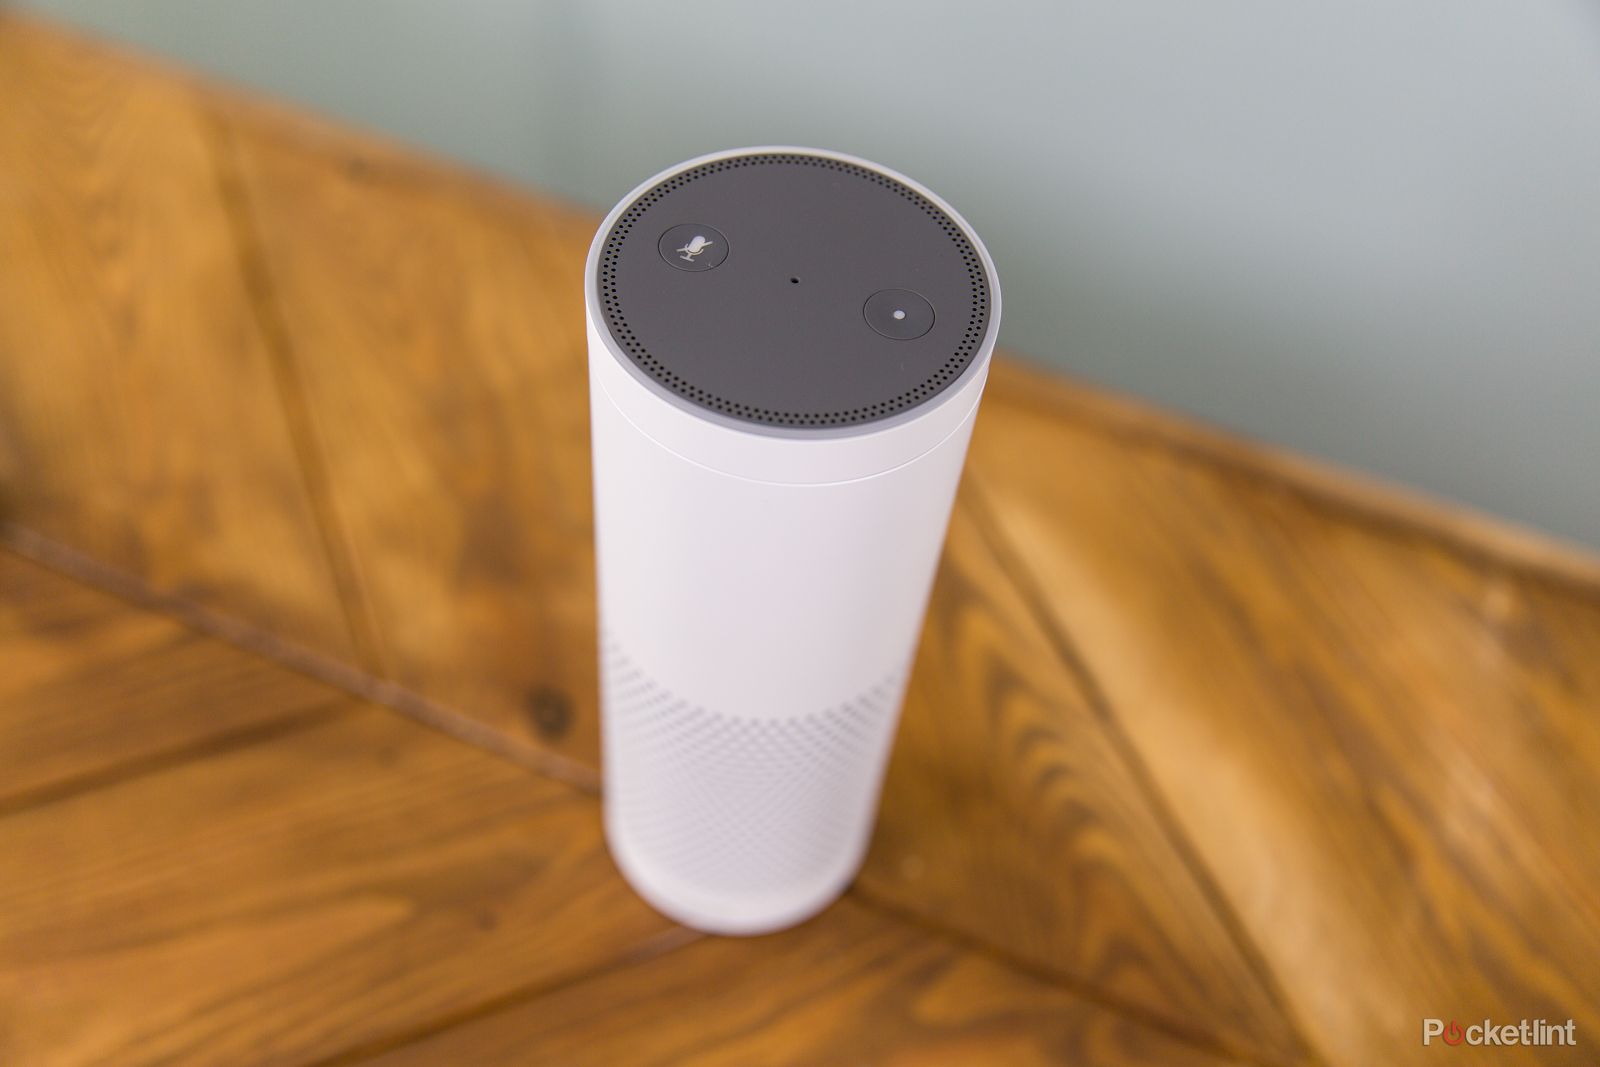 apple finalising plans for amazon echo like device to control your home through siri image 1